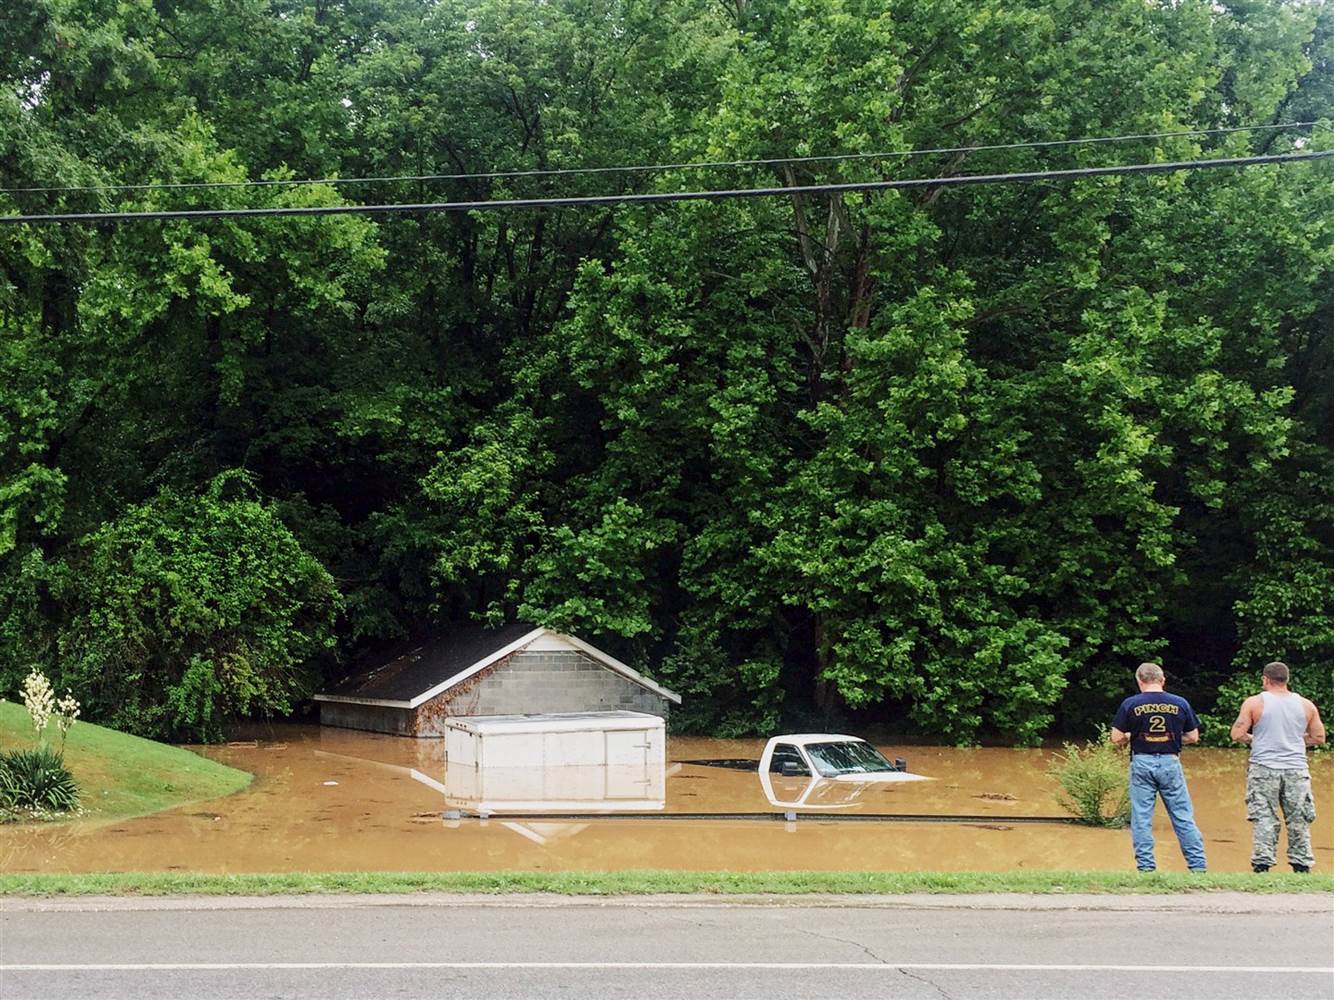 Flooding in Elkview, West Virginia on June 24, 2016 by Caleb Smith